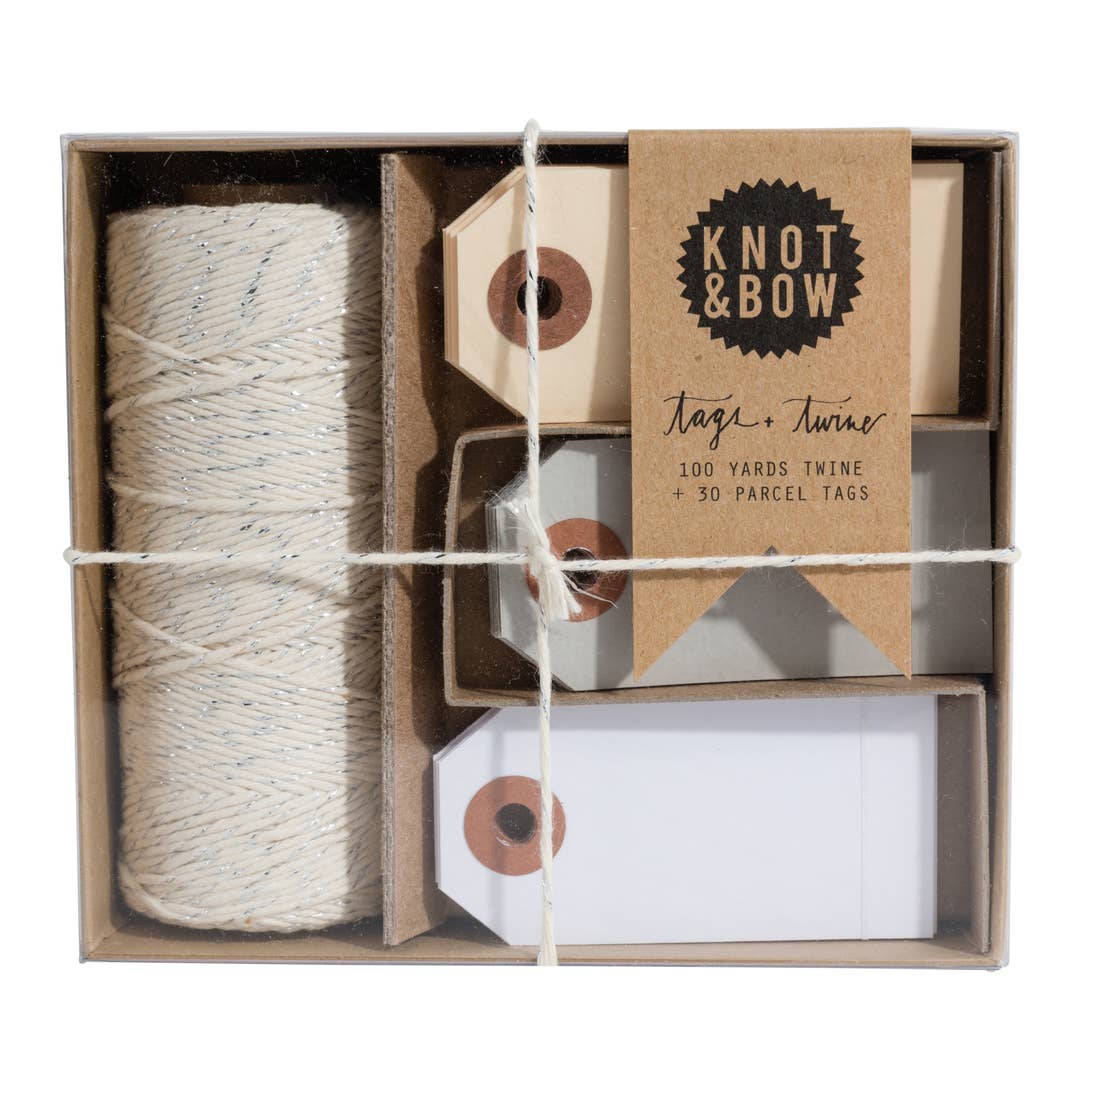 Knot & Bow Glitter Tag and Twine Box - Silver by Knot & Bow - K. A. Artist Shop